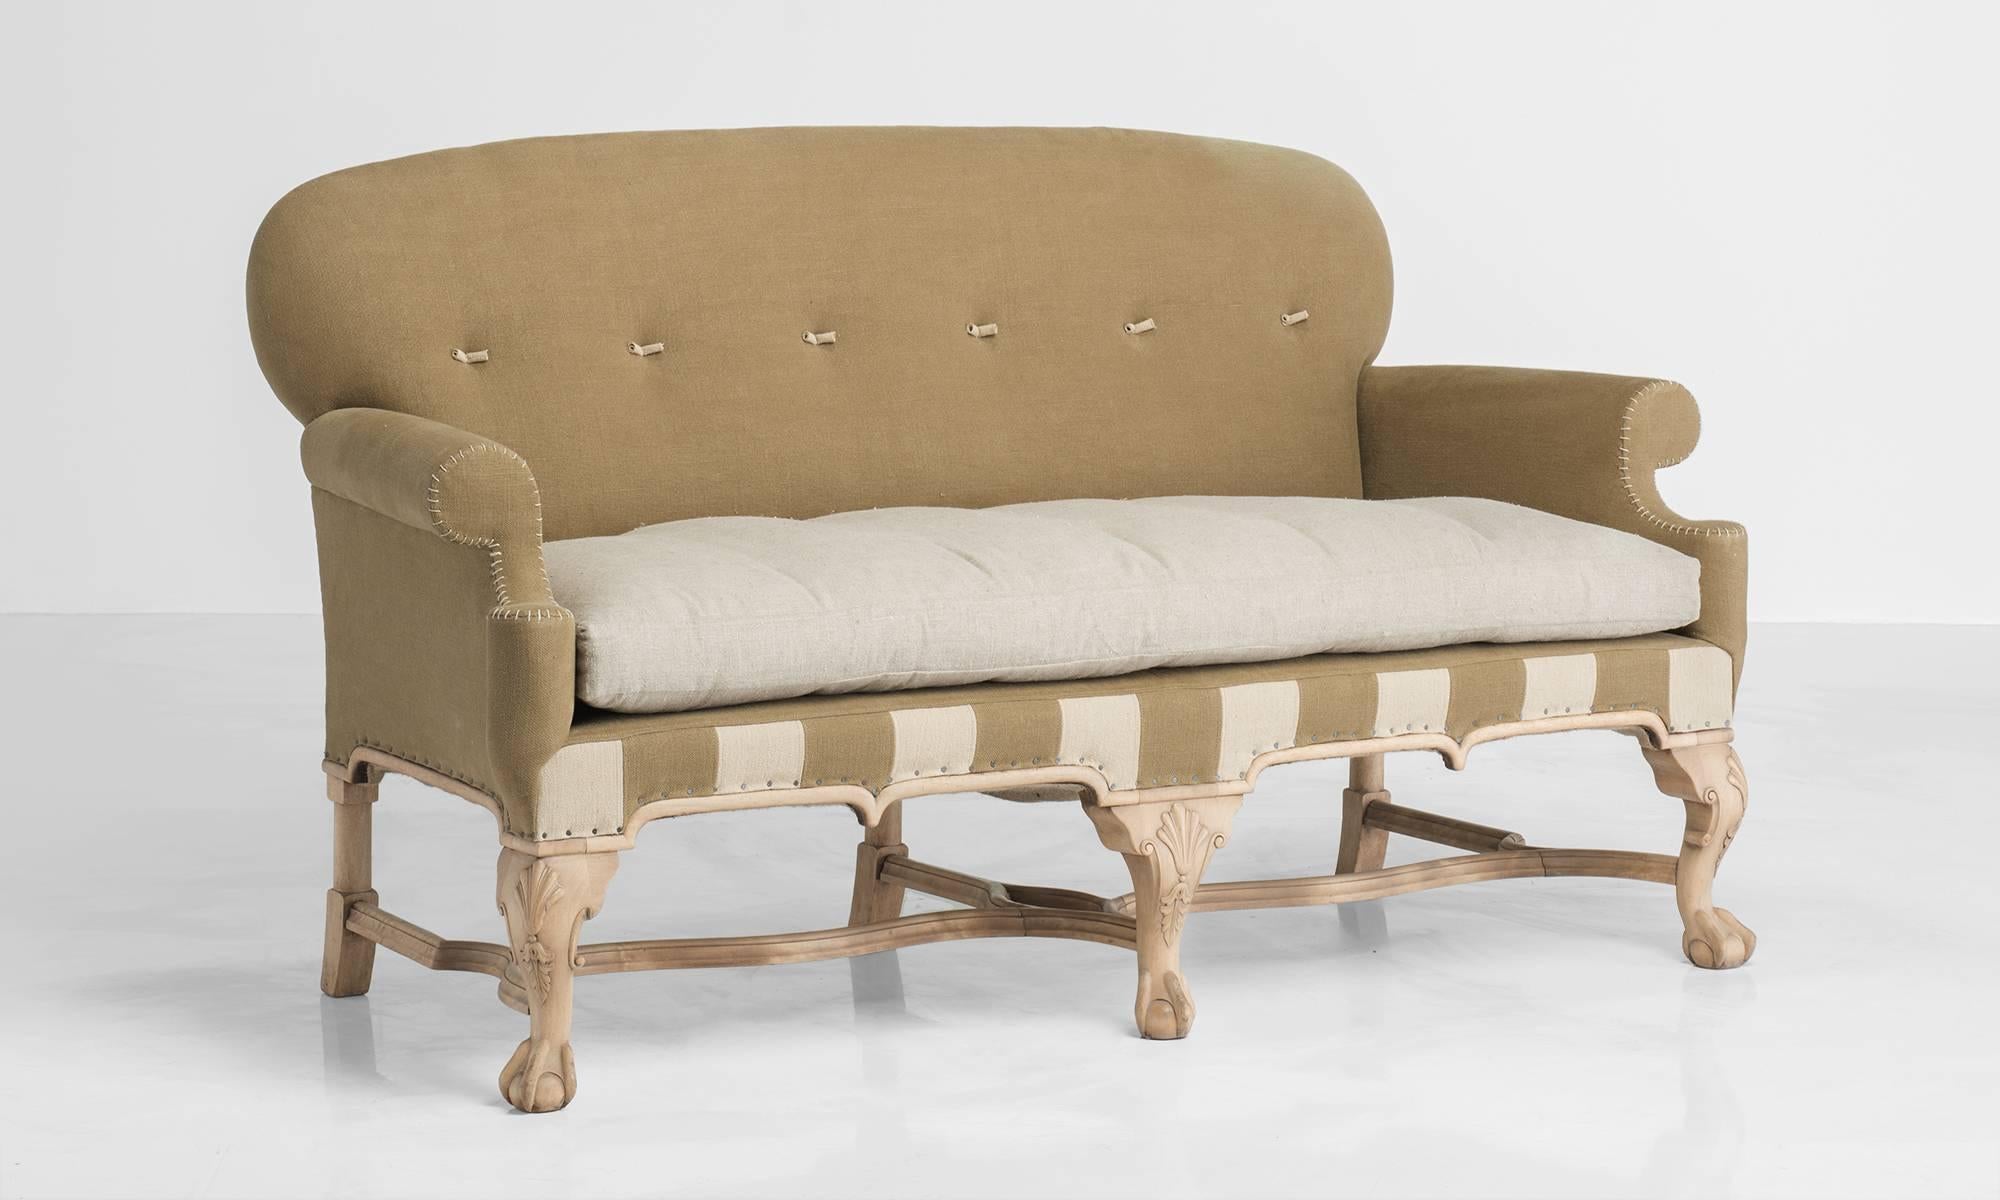 Upholstered Country Sofa, England, circa 1930

Handsome carved legs and frame, with newly upholstered seat and back.